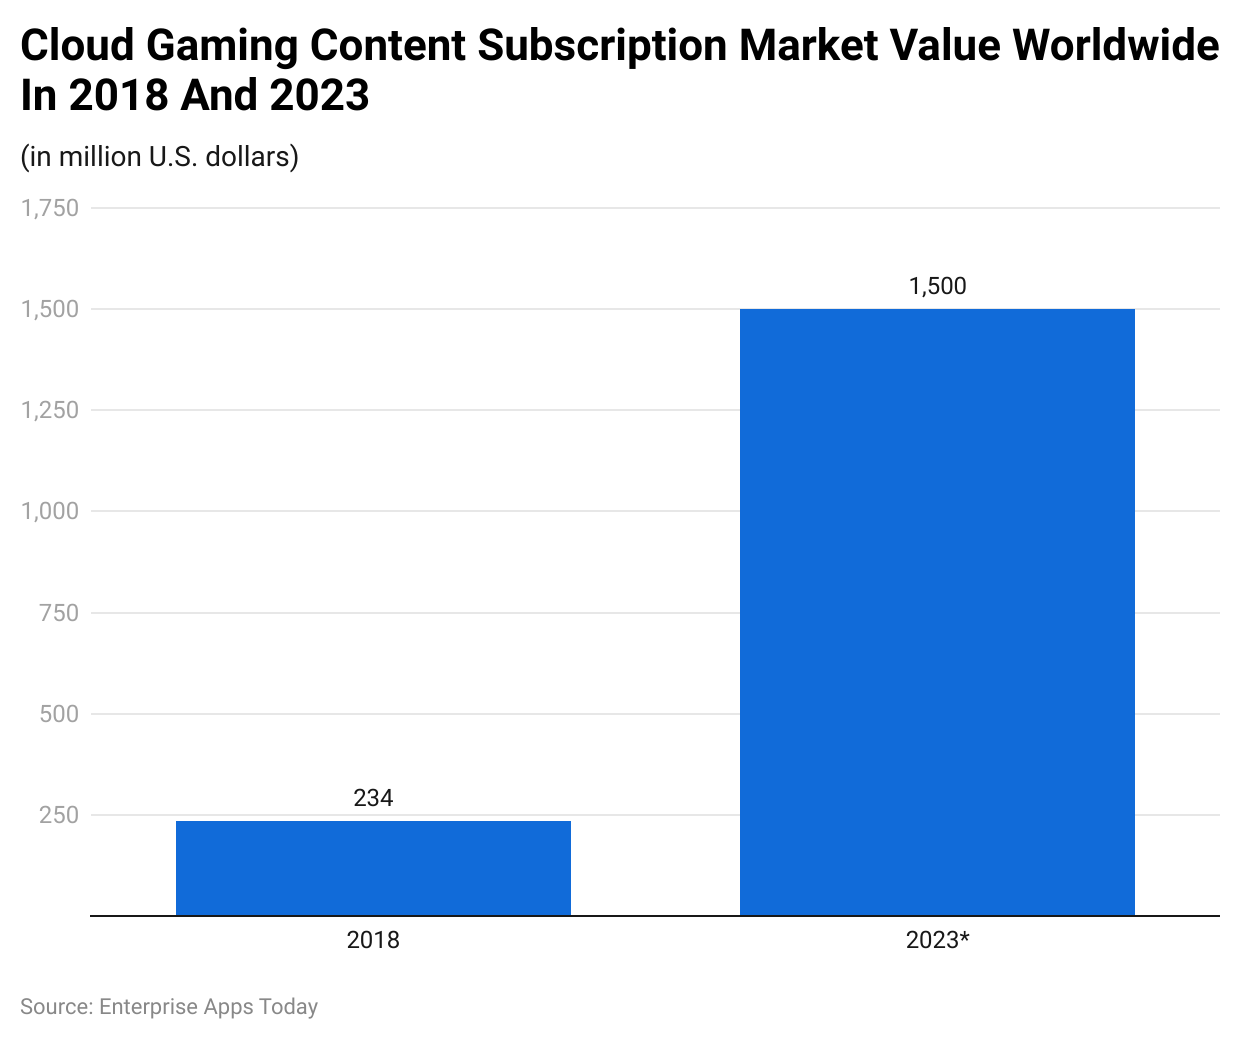 Cloud gaming content subscription market value worldwide in 2018 and 2023